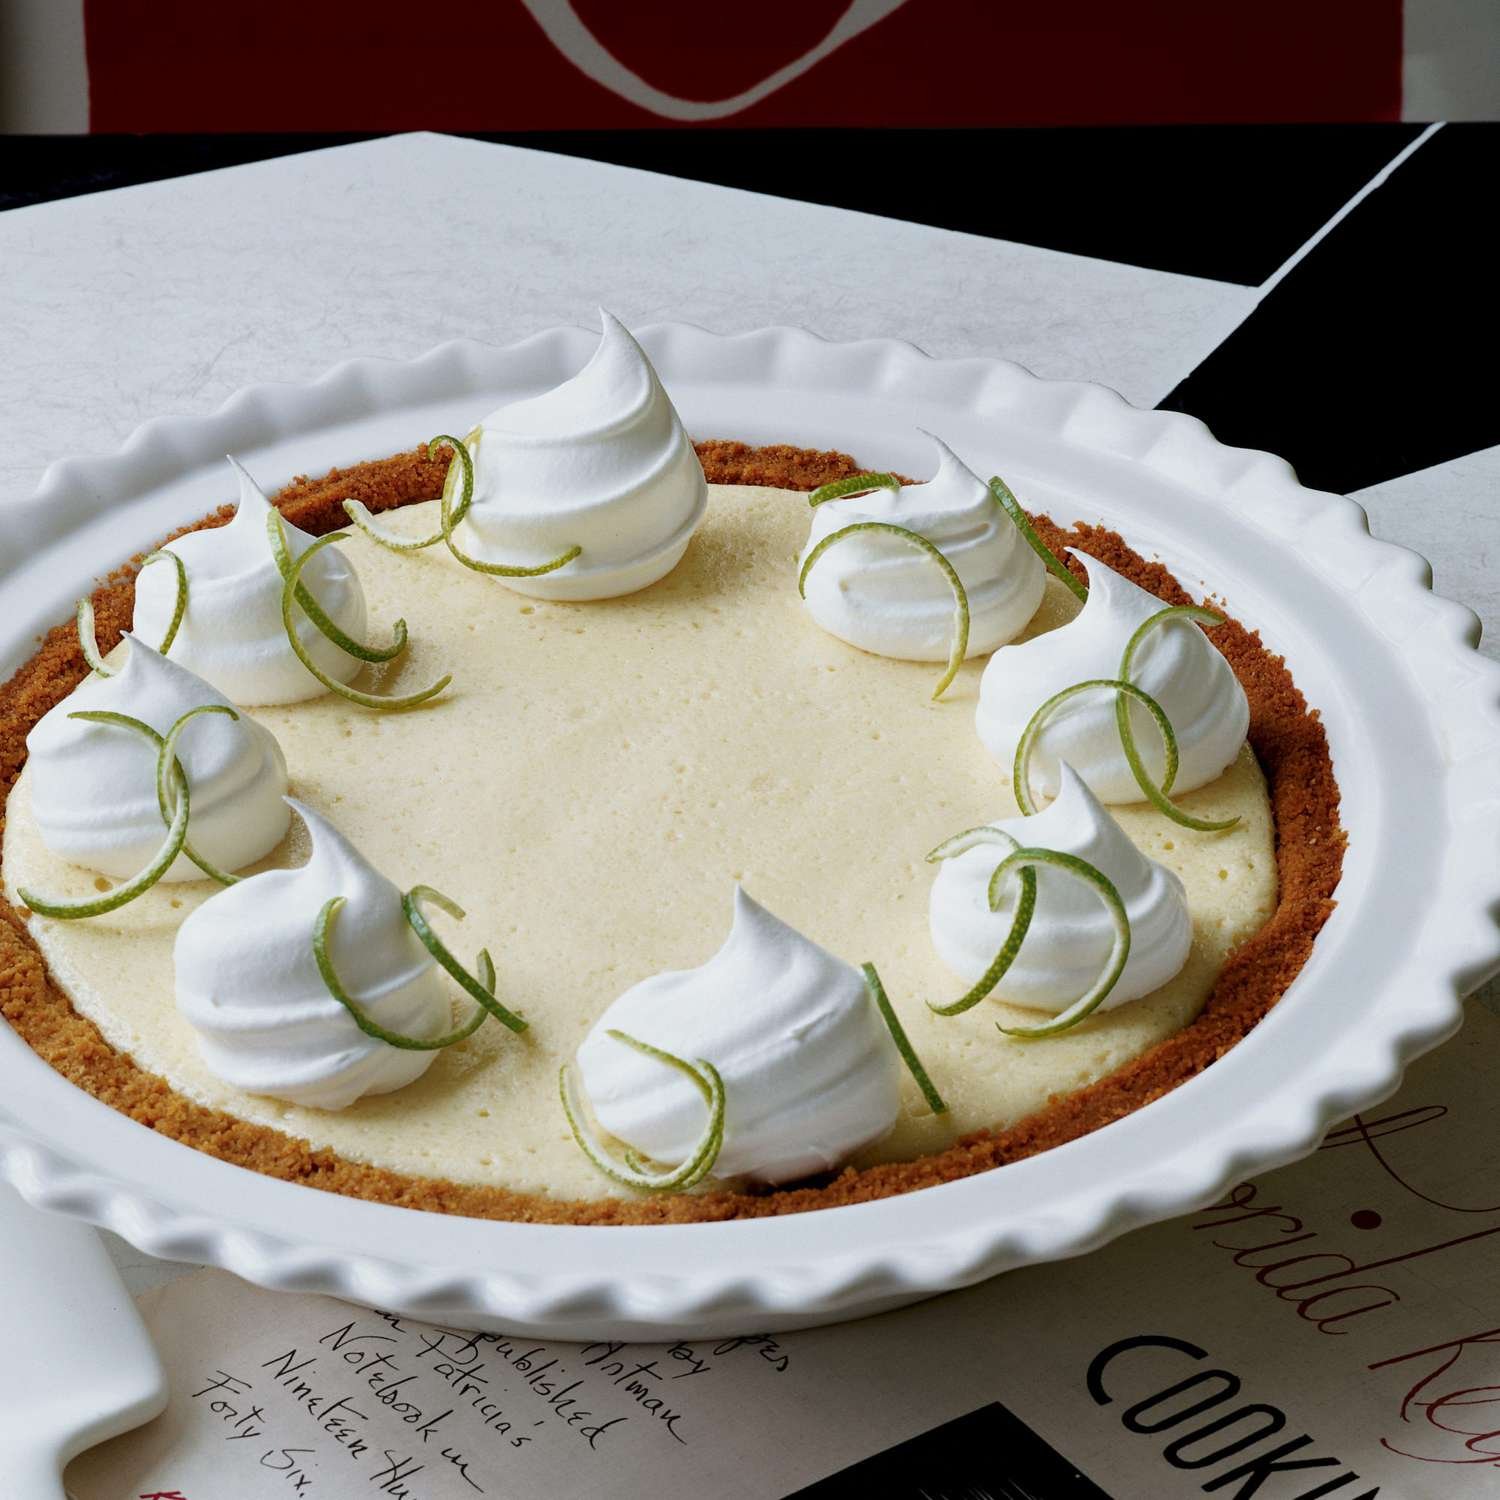 Tangy Key Lime Pie